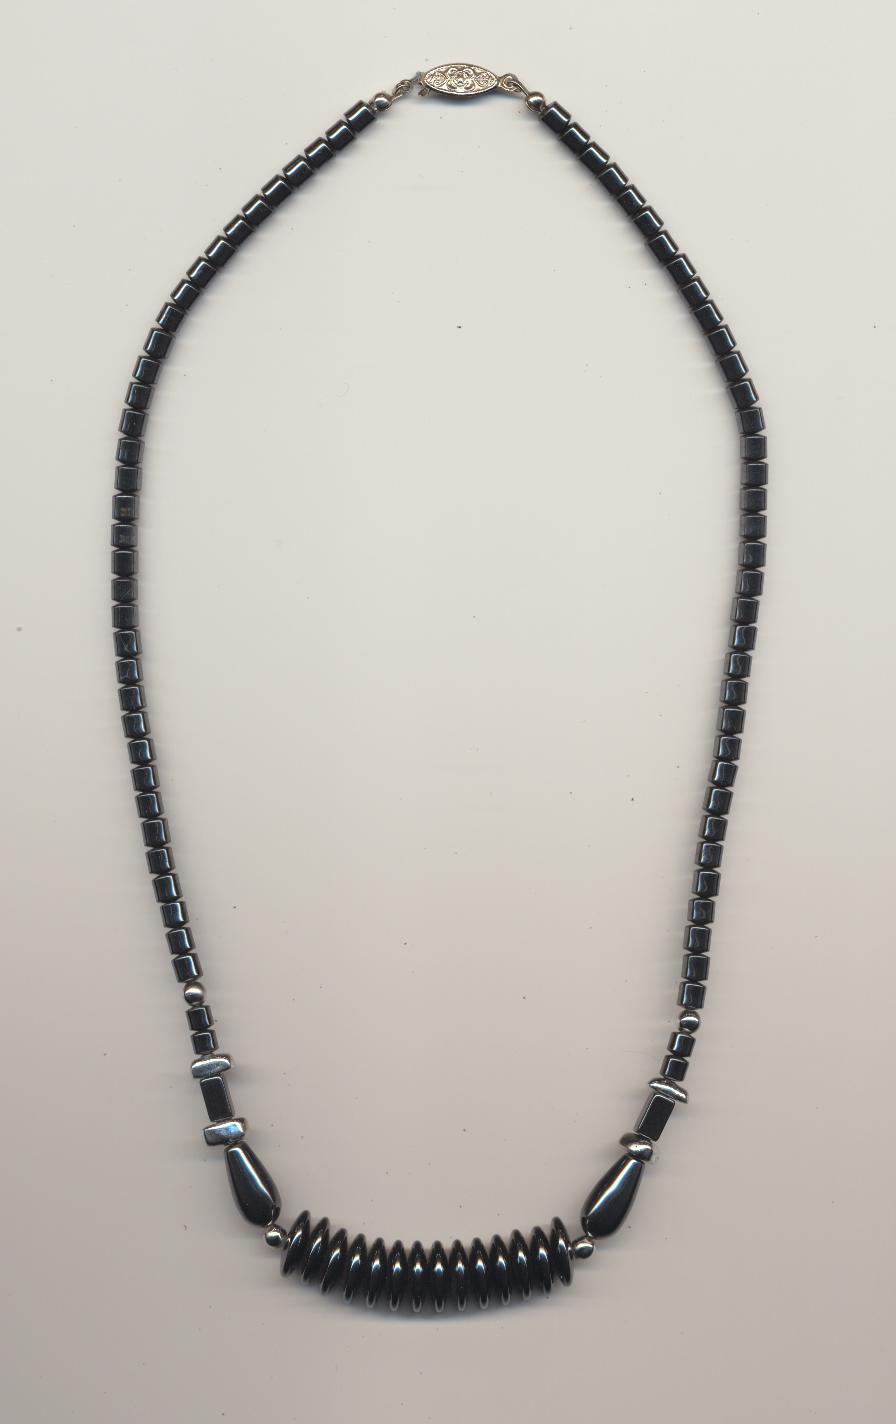 Necklace made of hematine and silver color metal beads, China, 1990, length 25'' 50cm.